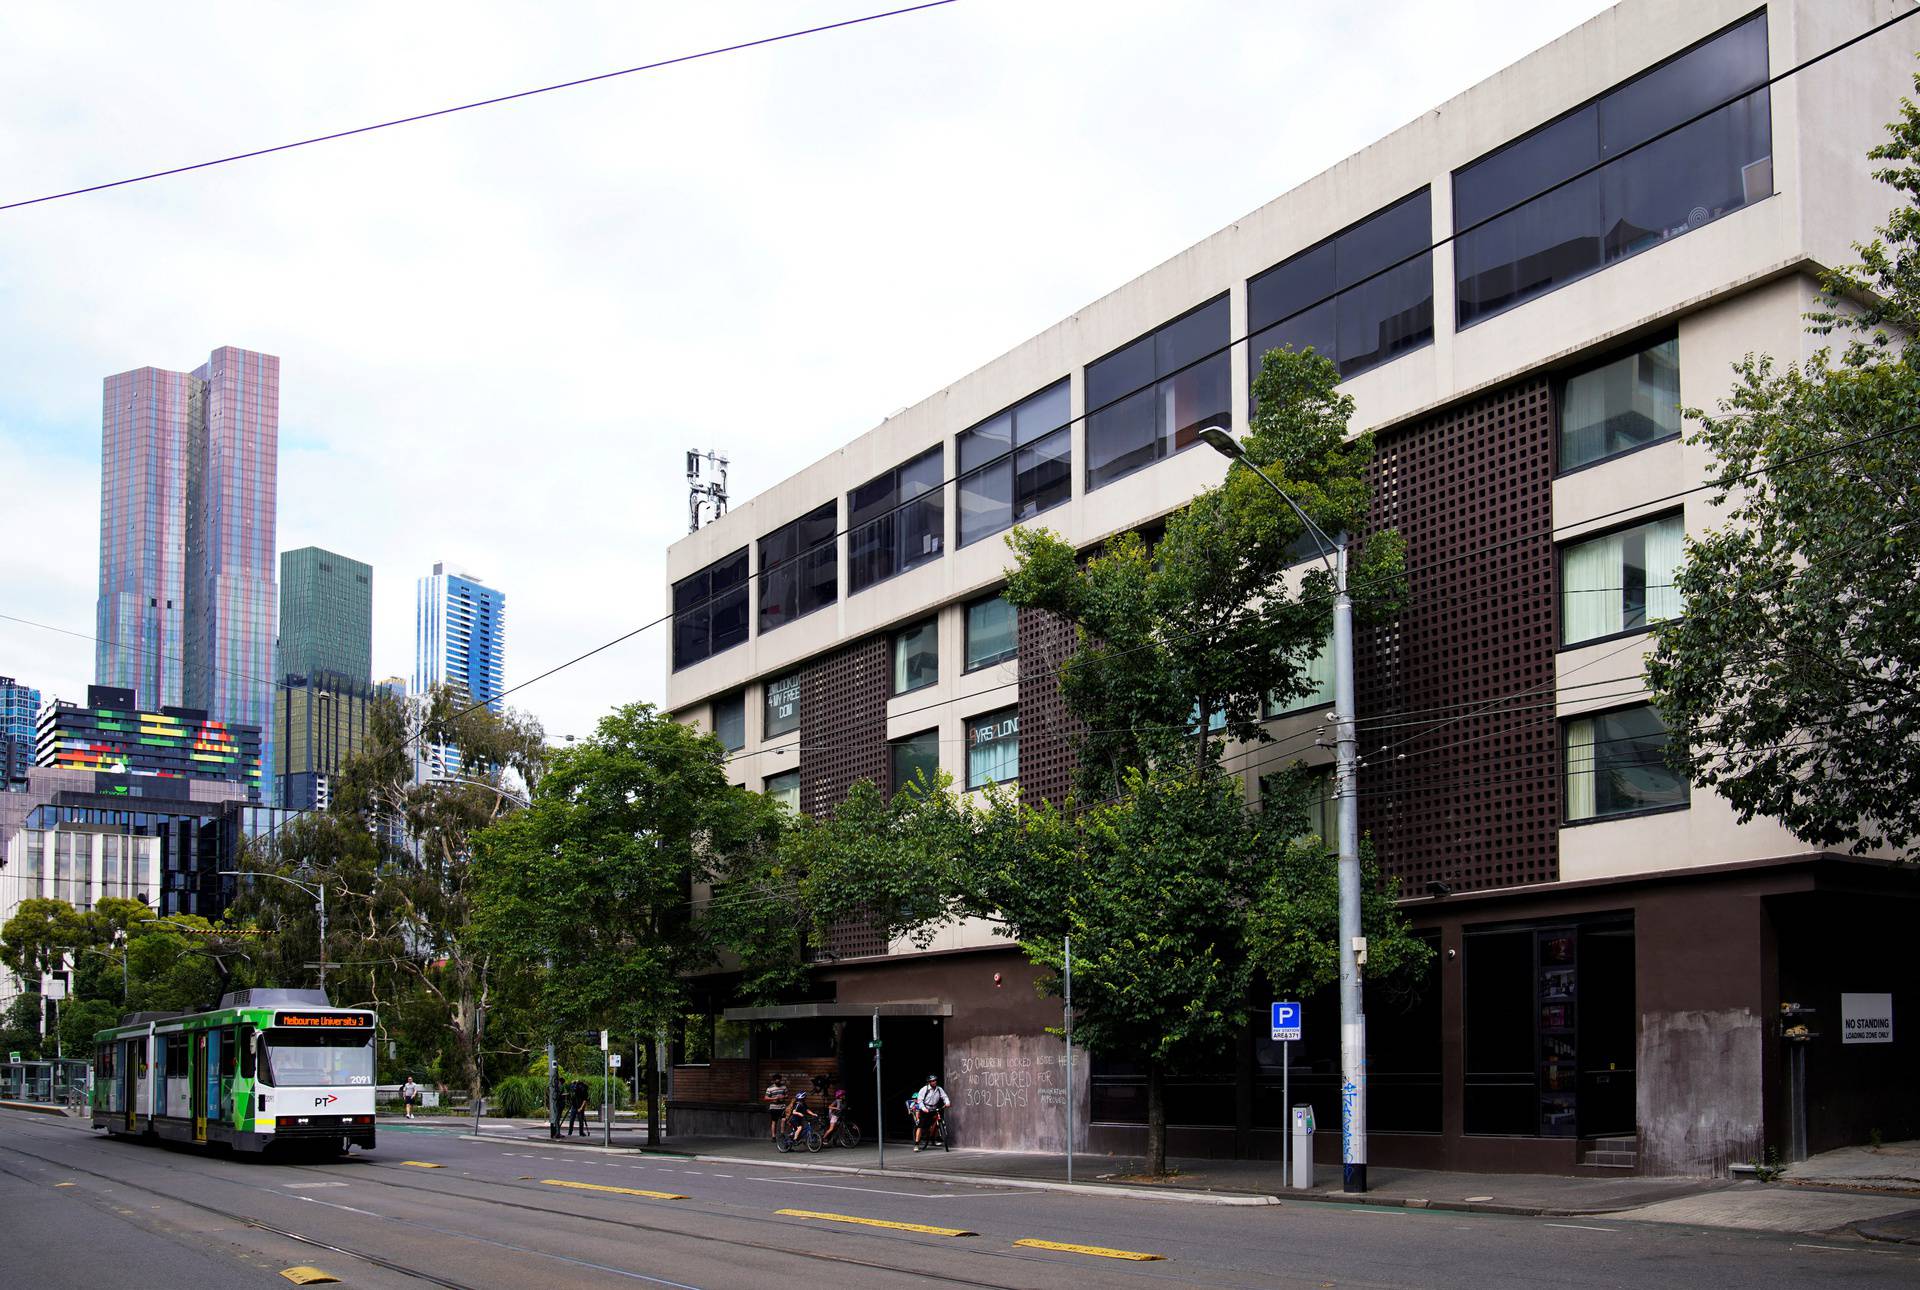 General view of the Park Hotel, believed to be holding Serbian tennis player Novak Djokovic in Melbourne